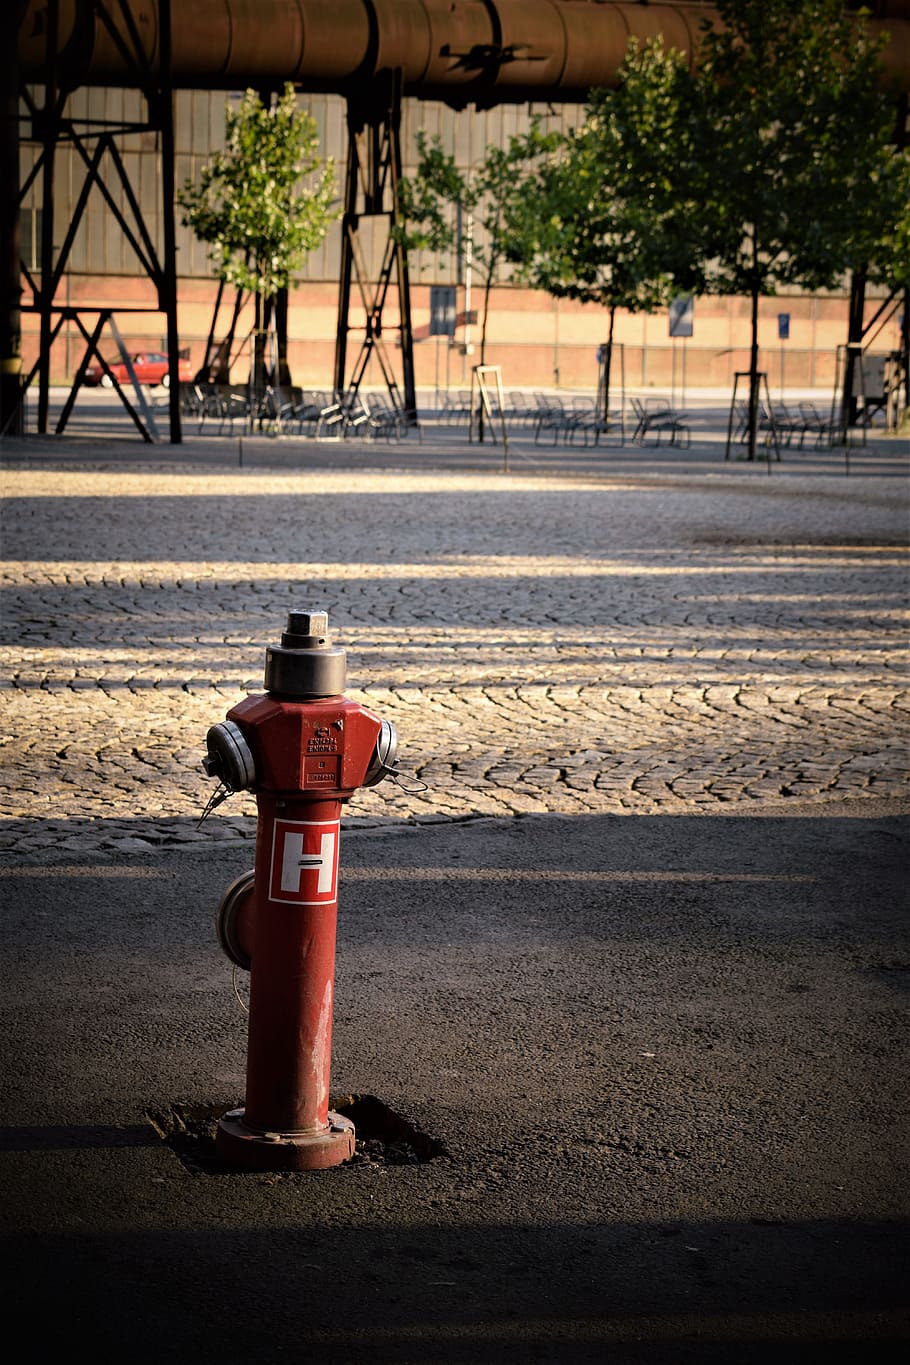 hydrant, street, paving, water, safety, security, protection, day, fire hydrant, emergency equipment